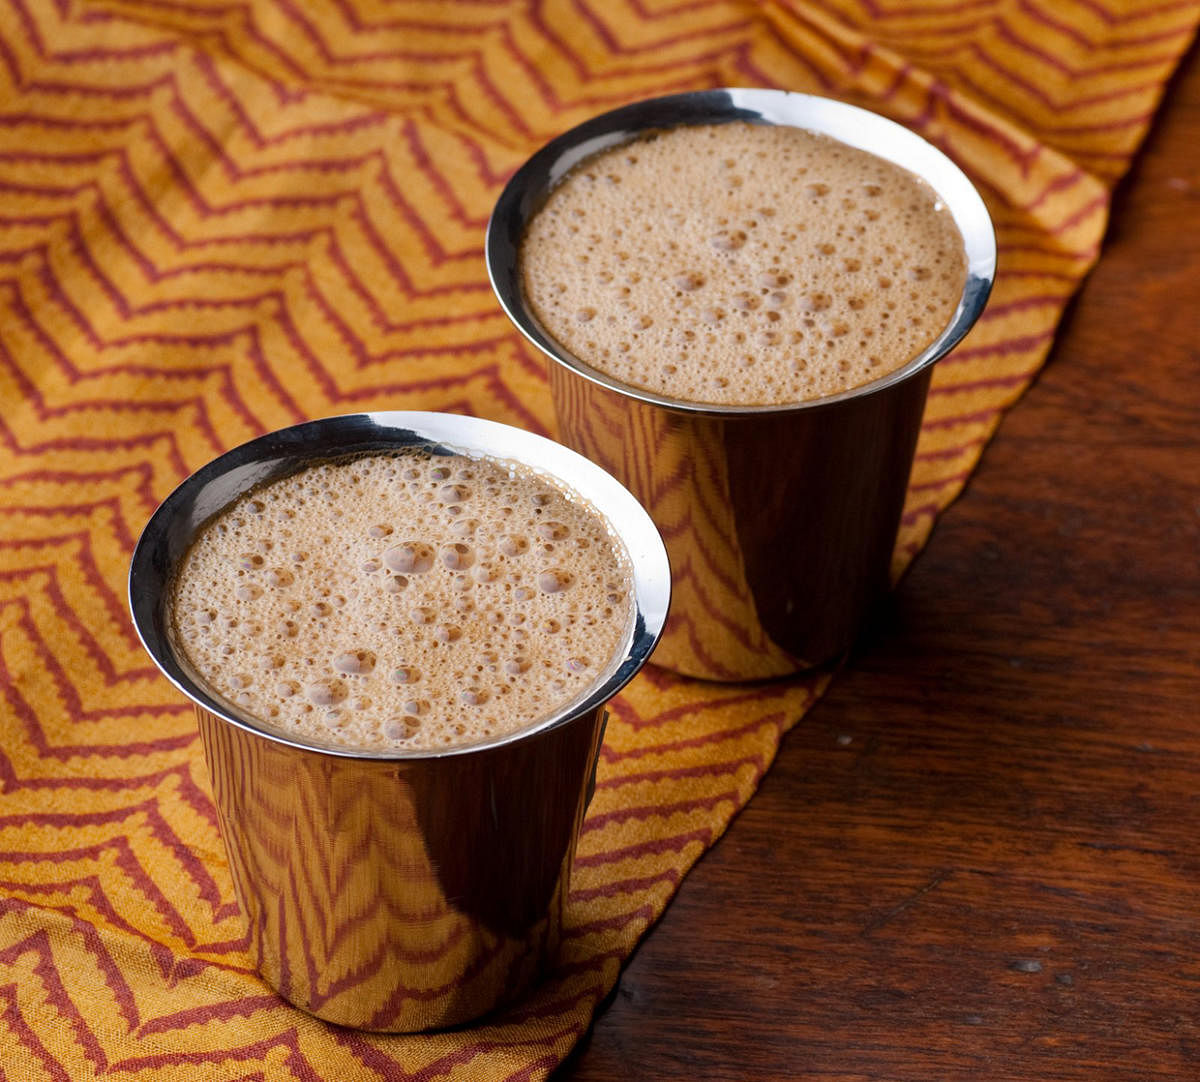 Filter coffee is a favourite among coffee lovers.